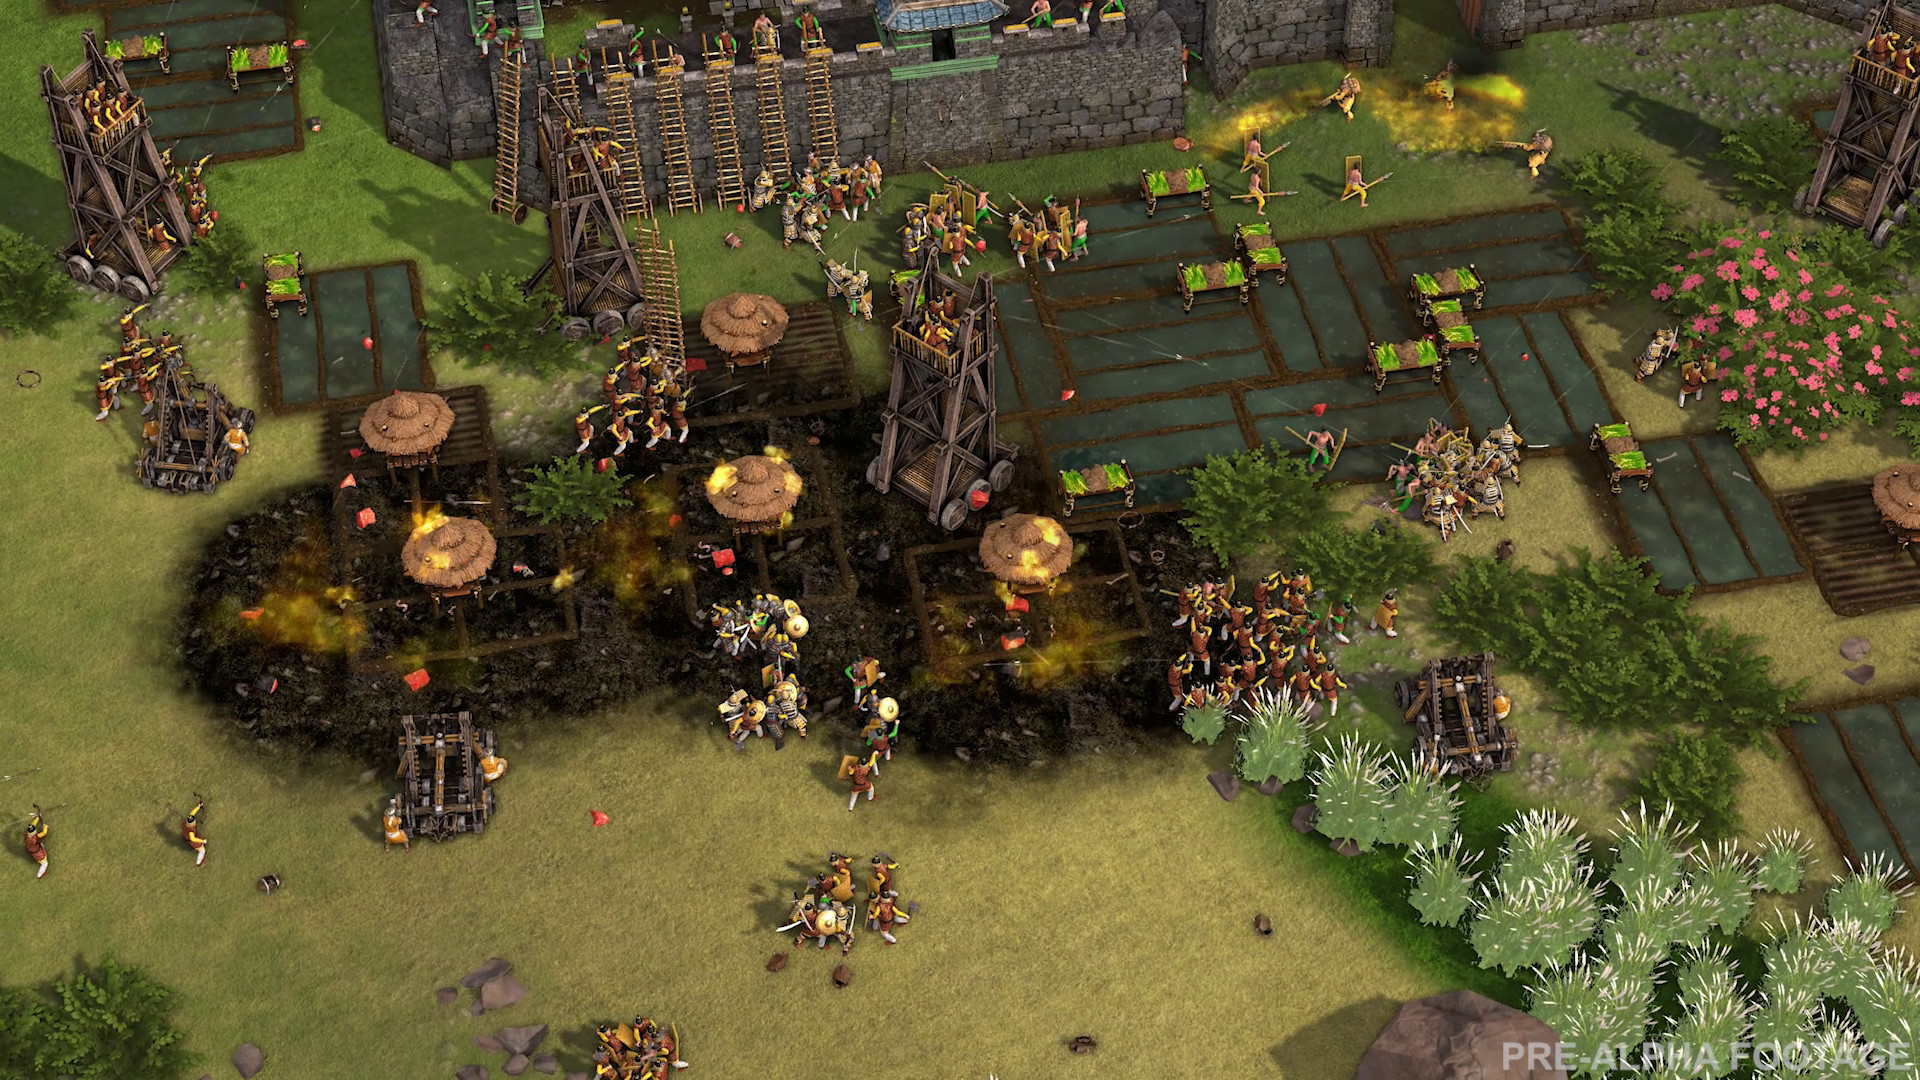 stronghold kingdoms vacation mode